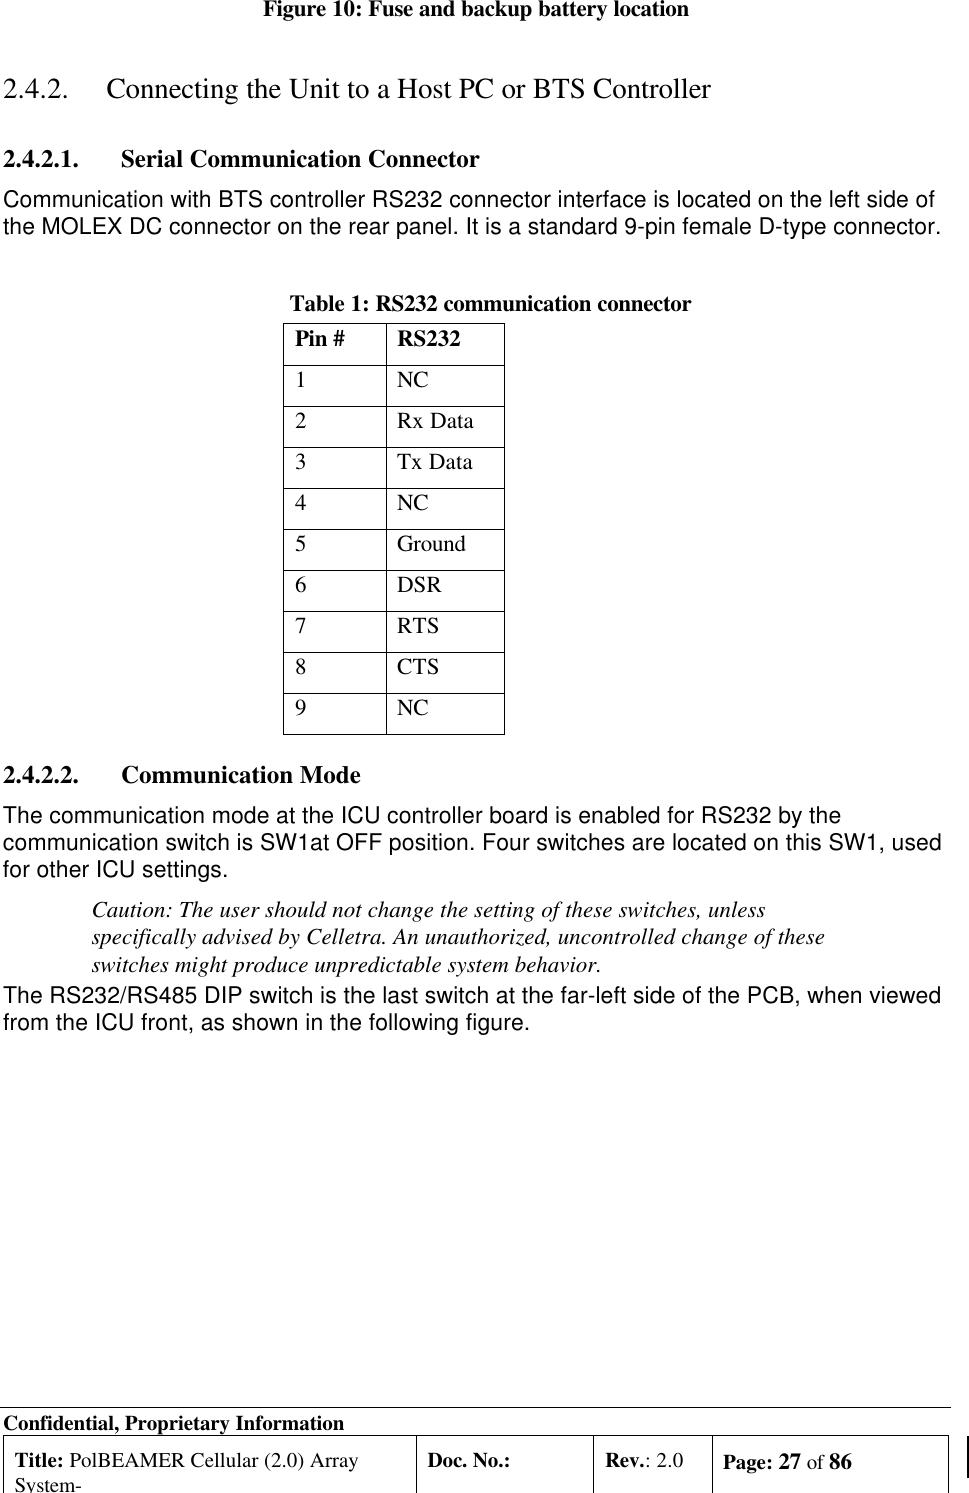 Confidential, Proprietary InformationTitle: PolBEAMER Cellular (2.0) ArraySystem-Doc. No.: Rev.: 2.0 Page: 27 of 86Figure 10: Fuse and backup battery location2.4.2. Connecting the Unit to a Host PC or BTS Controller2.4.2.1. Serial Communication ConnectorCommunication with BTS controller RS232 connector interface is located on the left side ofthe MOLEX DC connector on the rear panel. It is a standard 9-pin female D-type connector.Table 1: RS232 communication connectorPin # RS2321NC2Rx Data3Tx Data4NC5Ground6DSR7RTS8CTS9NC2.4.2.2. Communication ModeThe communication mode at the ICU controller board is enabled for RS232 by thecommunication switch is SW1at OFF position. Four switches are located on this SW1, usedfor other ICU settings.Caution: The user should not change the setting of these switches, unlessspecifically advised by Celletra. An unauthorized, uncontrolled change of theseswitches might produce unpredictable system behavior.The RS232/RS485 DIP switch is the last switch at the far-left side of the PCB, when viewedfrom the ICU front, as shown in the following figure.